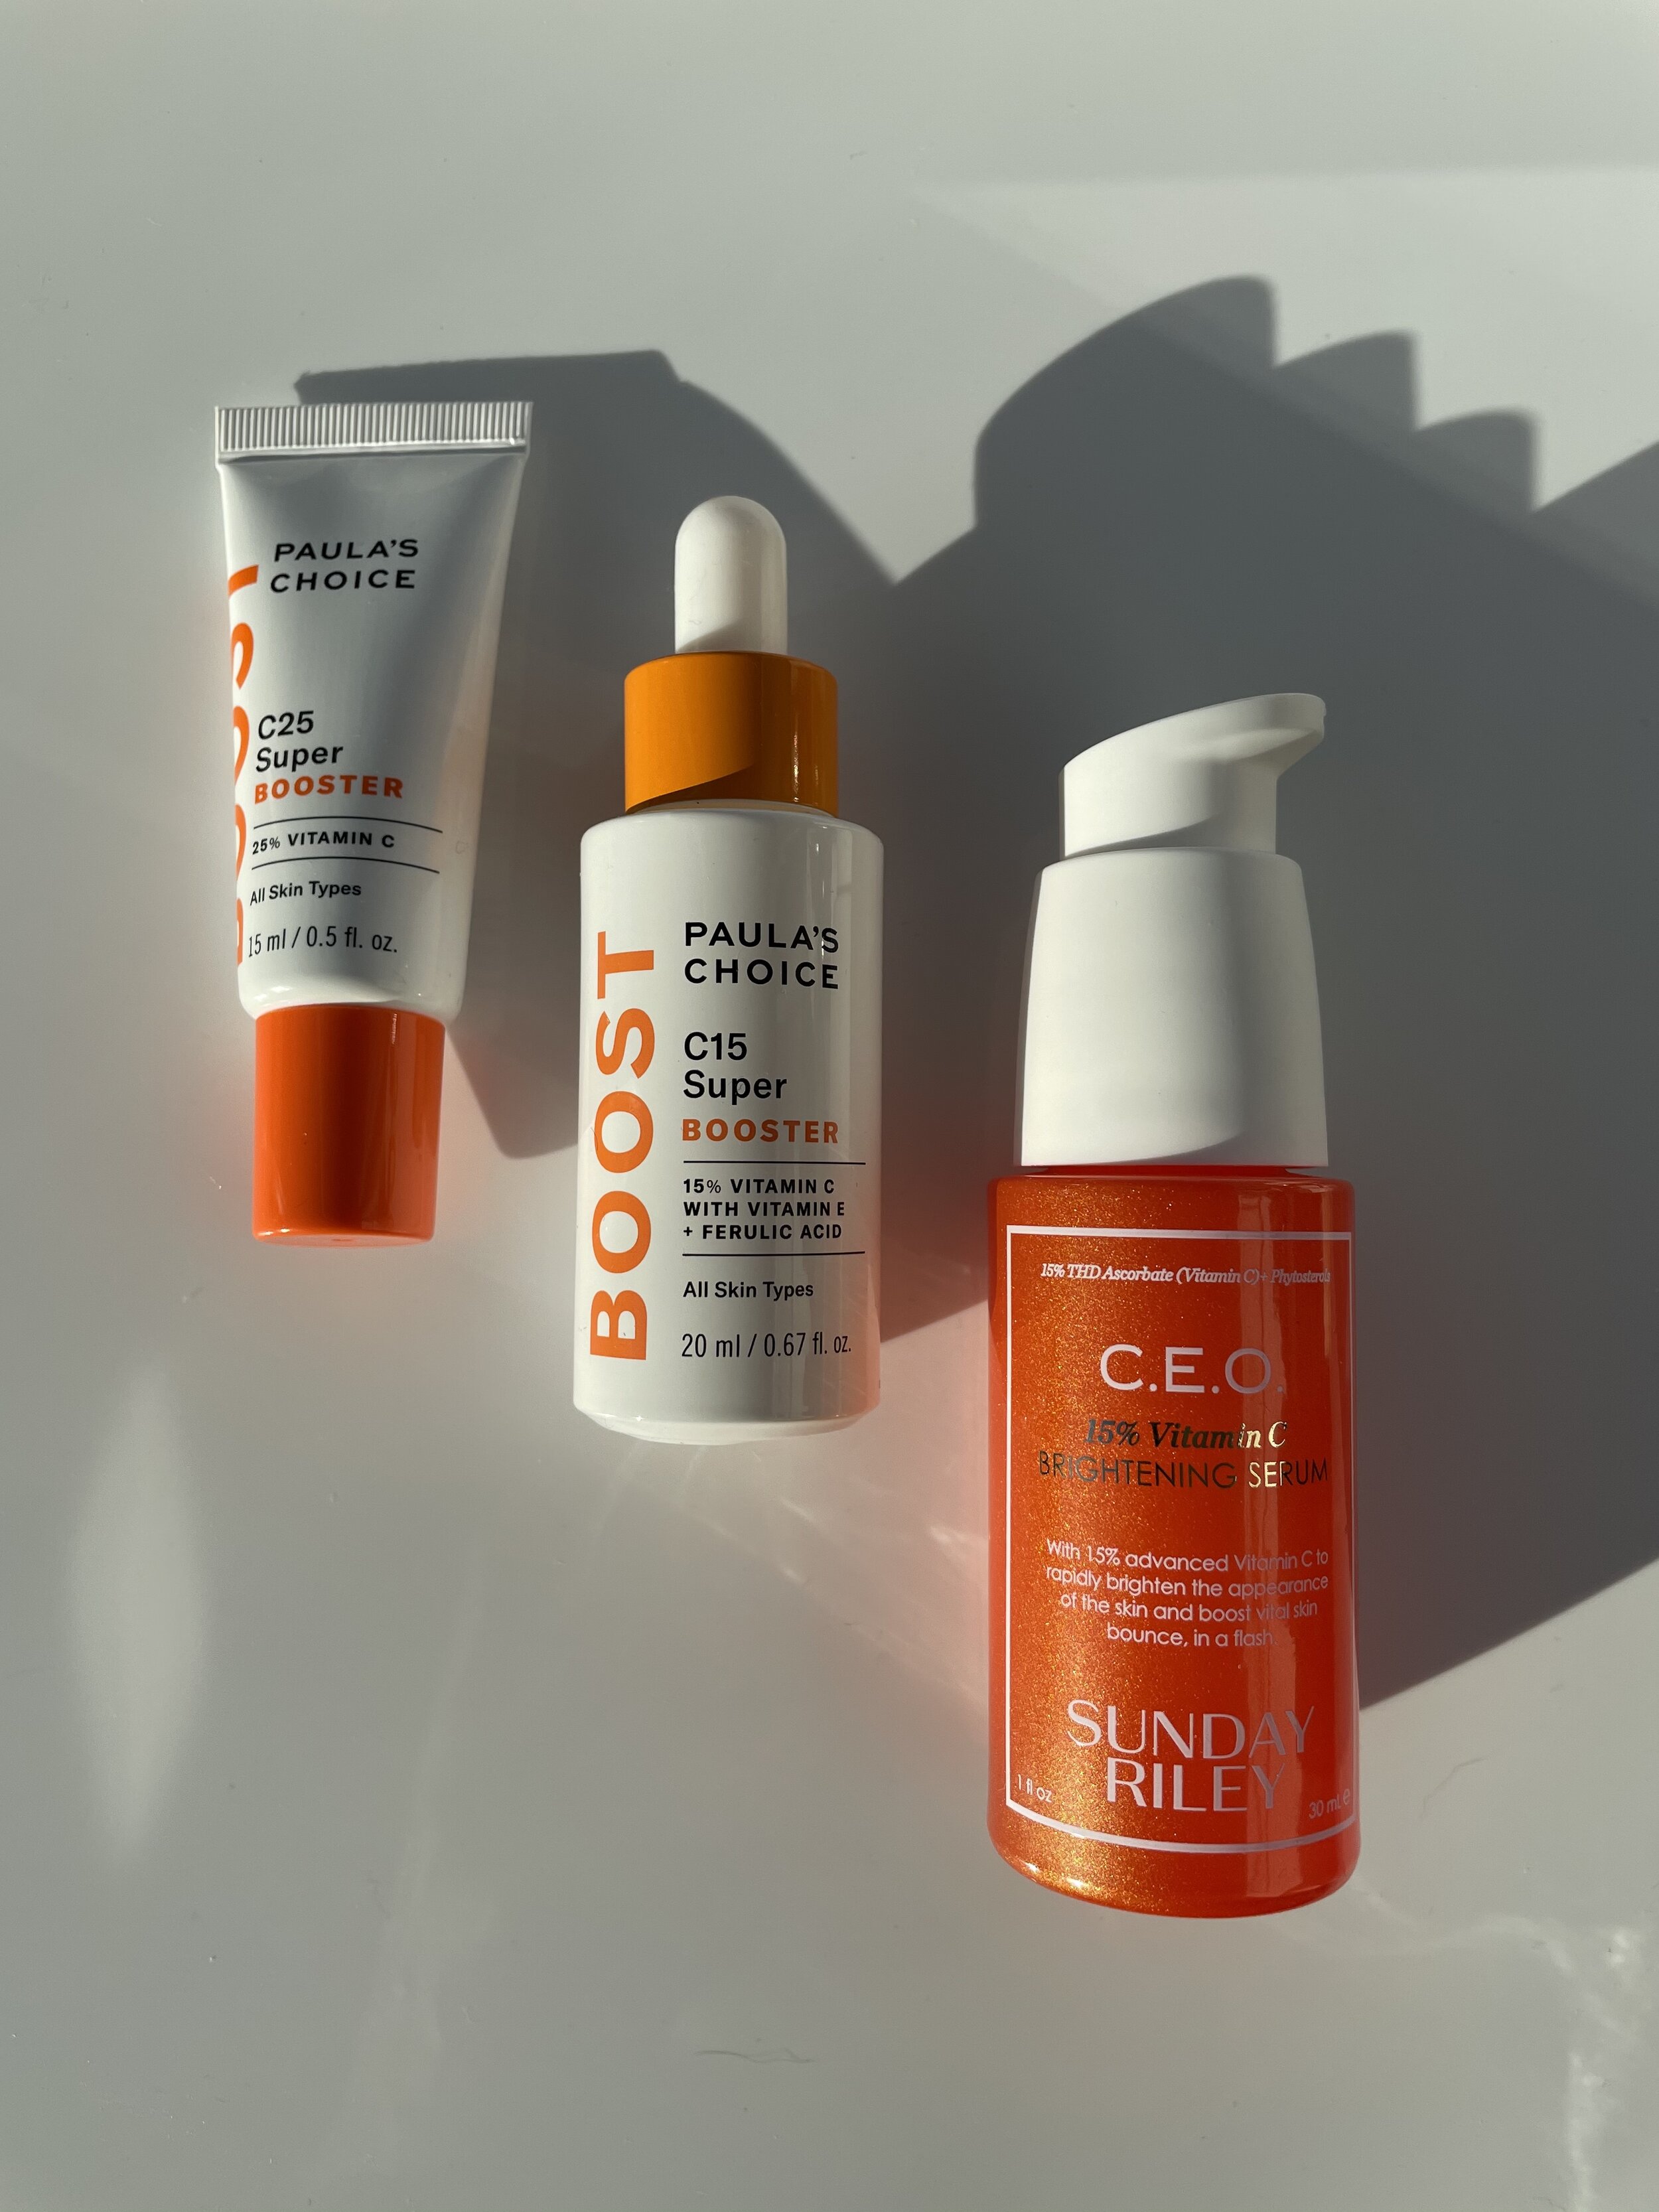 at forstå Skære Cape THE YEAR'S BEST VITAMIN C SERUMS WITH PAULA'S CHOICE, SUNDAY RILEY, THE  INKEY LIST AND MORE!